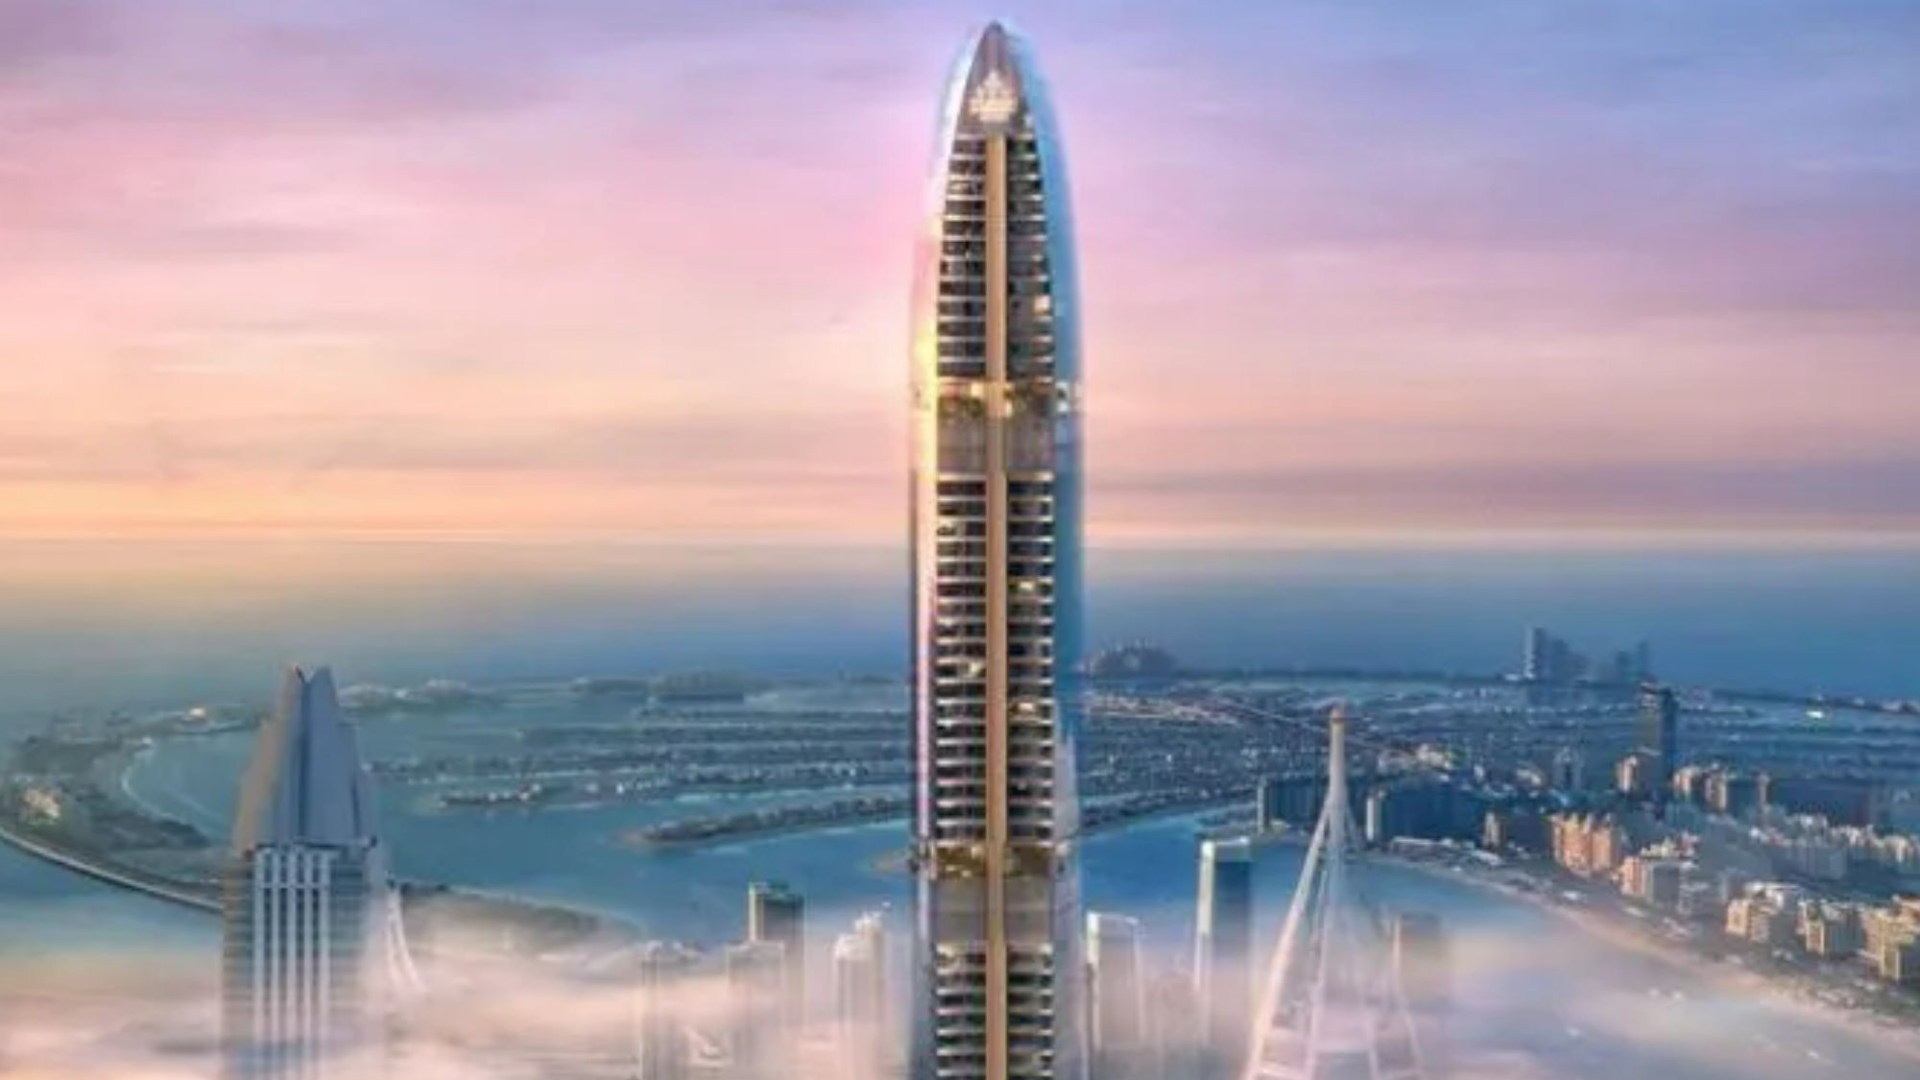 Dubai unveils worlds tallest residential tower with 122-storey ‘Six Senses’ with skydeck pool & 5-bed Sky Mansions [Video]